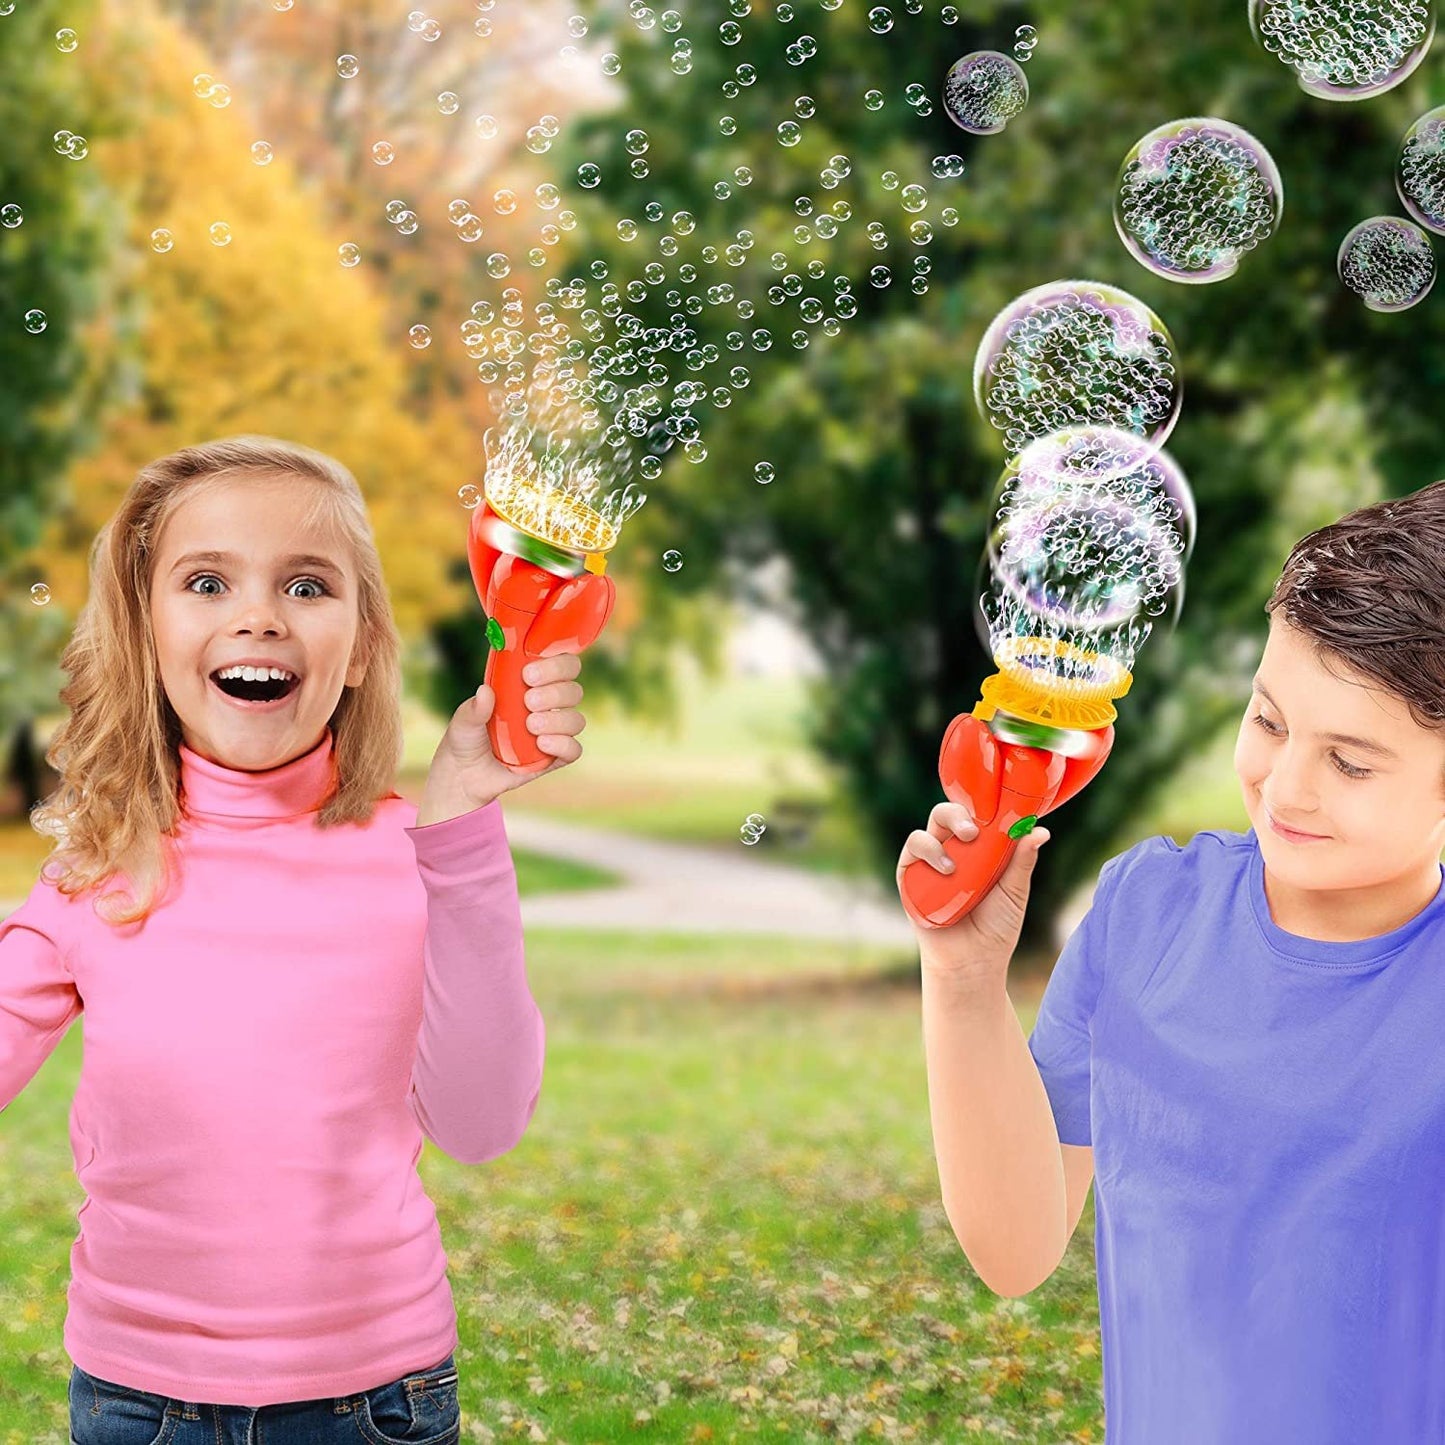 ArtCreativity Double Bubble Blower Fan - Battery-Operated Bubbles Blaster - 4 oz Solution and Dipping Tray Included - Fun Bubble Shooter for Boys and Girls, Great Outdoor Summer Game - Orange